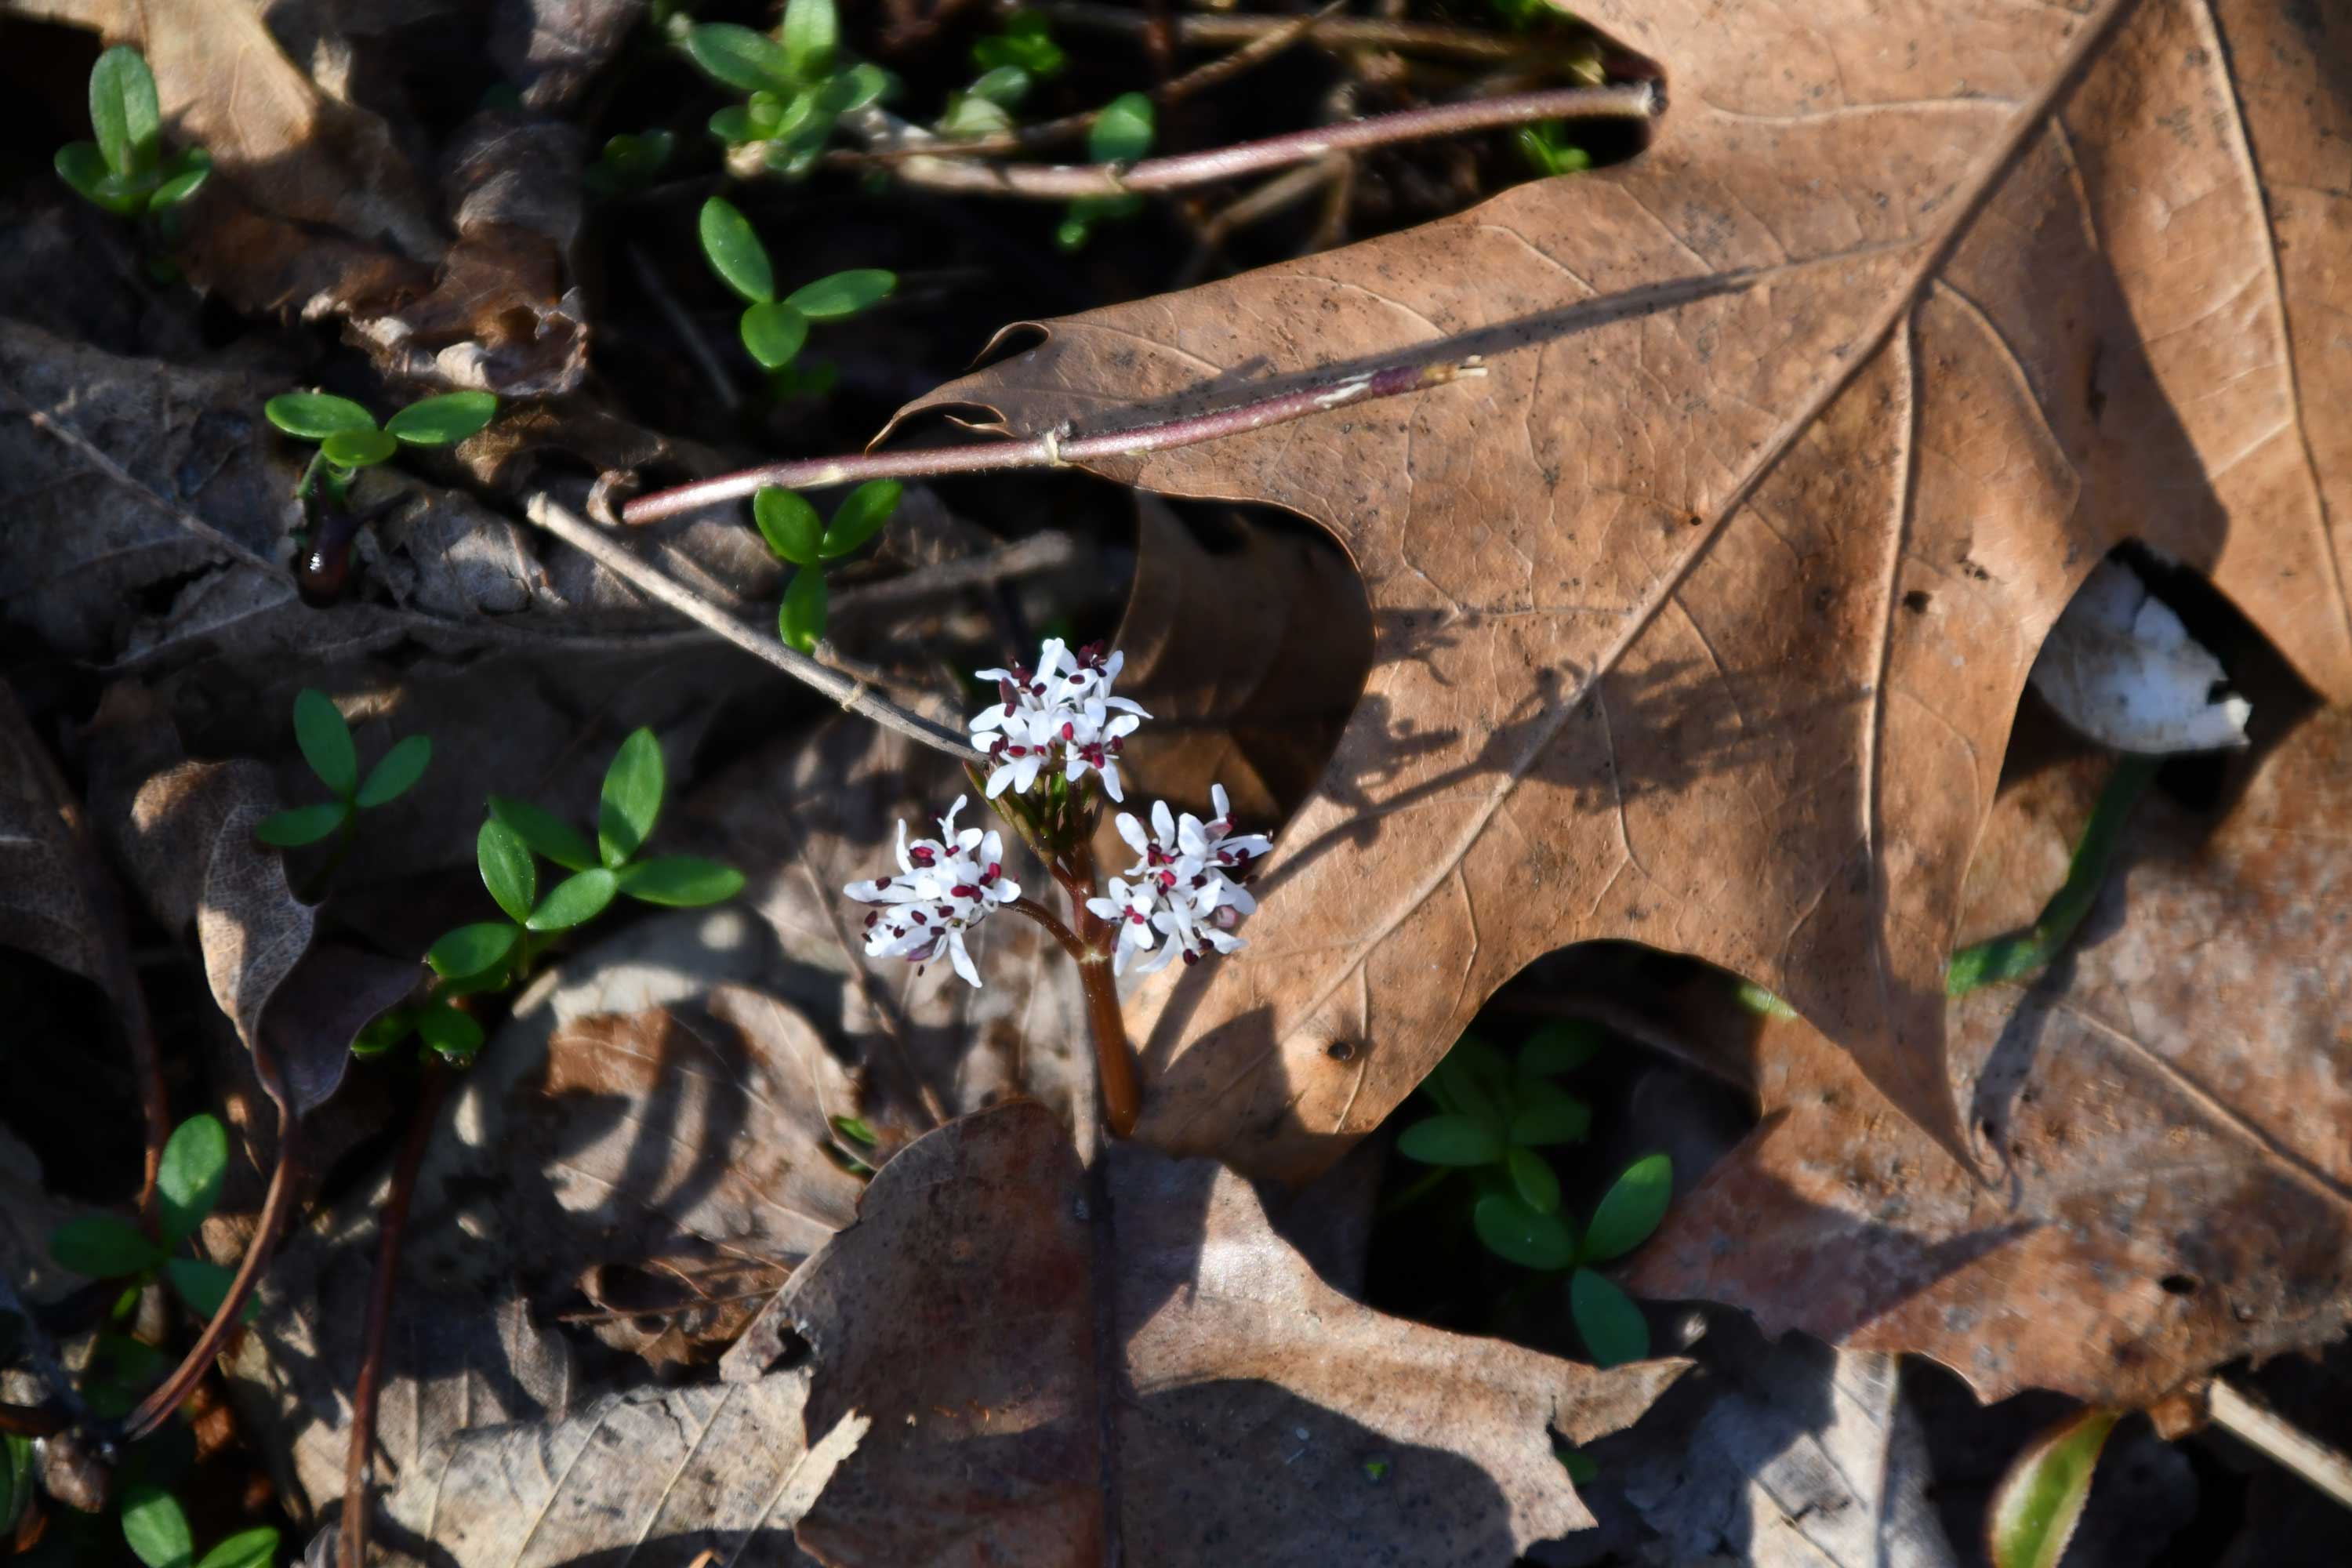 The tiny petals of harbinger of spring.